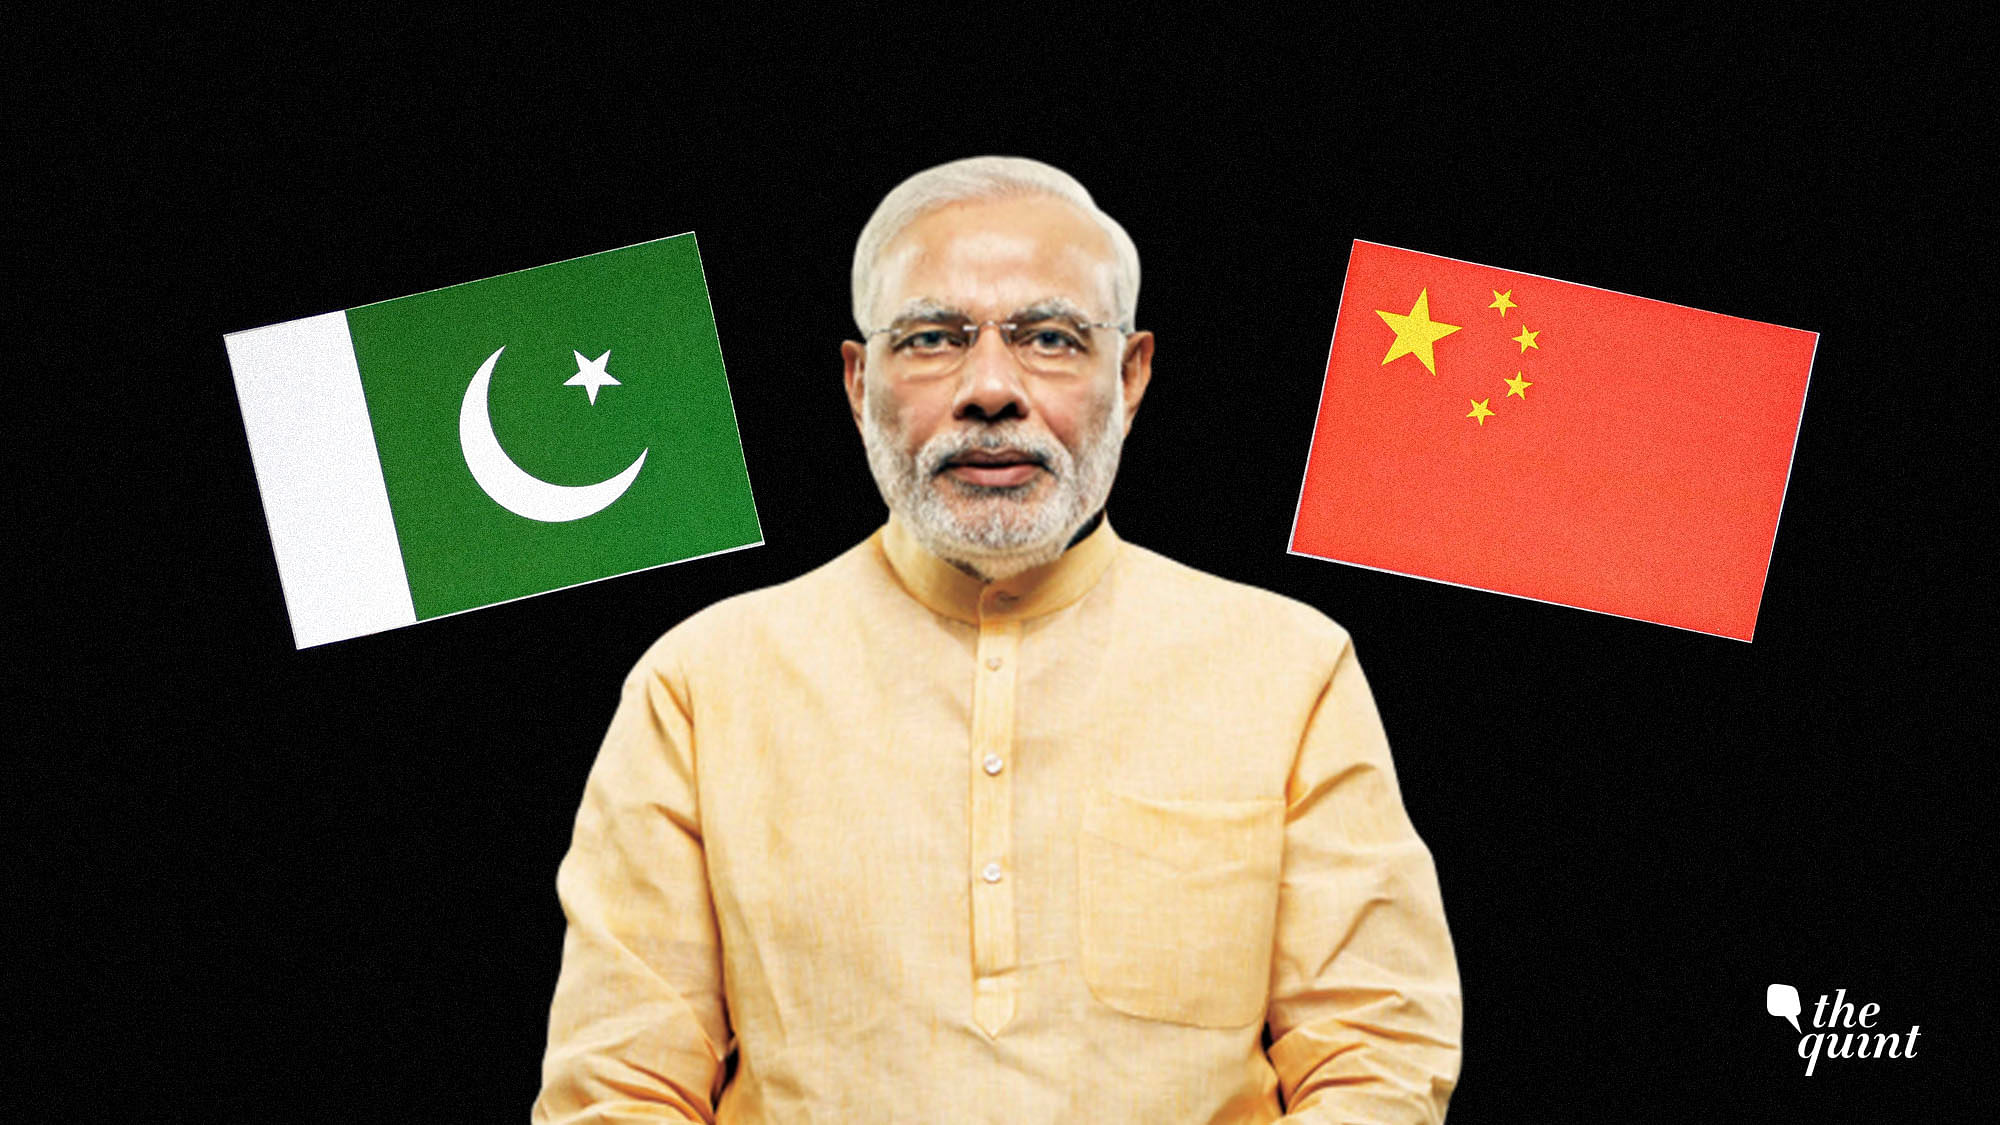 Image of PM Modi and flags of China (R) and Pakistan (L) used for representation.